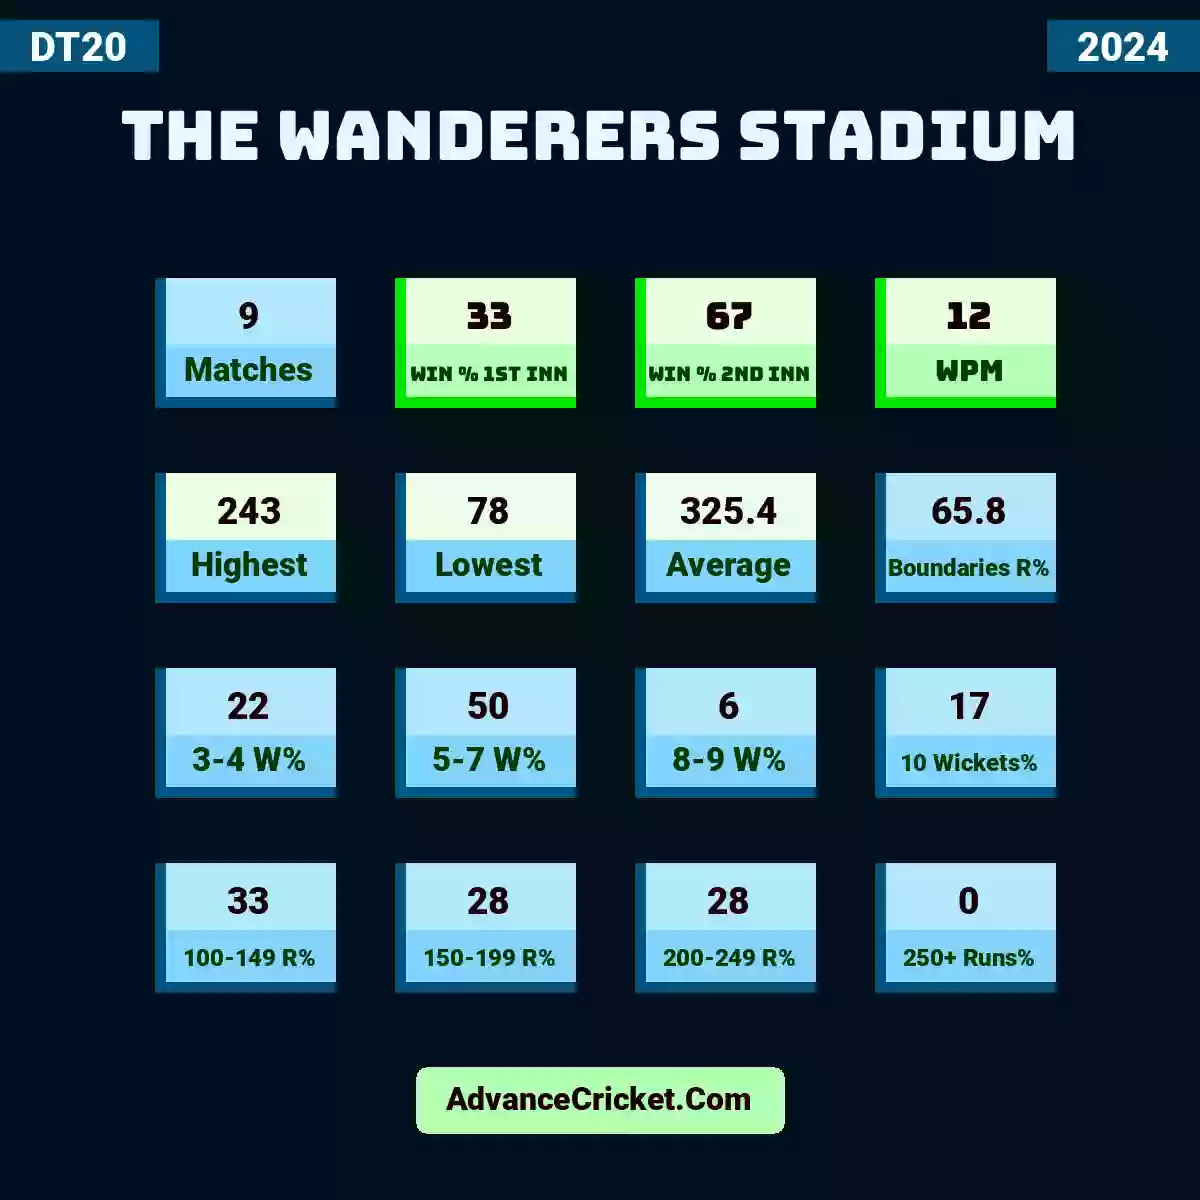 Image showing The Wanderers Stadium DT20 2024 with Matches: 9, Win % 1st Inn: 33, Win % 2nd Inn: 67, WPM: 12, Highest: 243, Lowest: 78, Average: 325.4, Boundaries R%: 65.8, 3-4 W%: 22, 5-7 W%: 50, 8-9 W%: 6, 10 Wickets%: 17, 100-149 R%: 33, 150-199 R%: 28, 200-249 R%: 28, 250+ Runs%: 0.